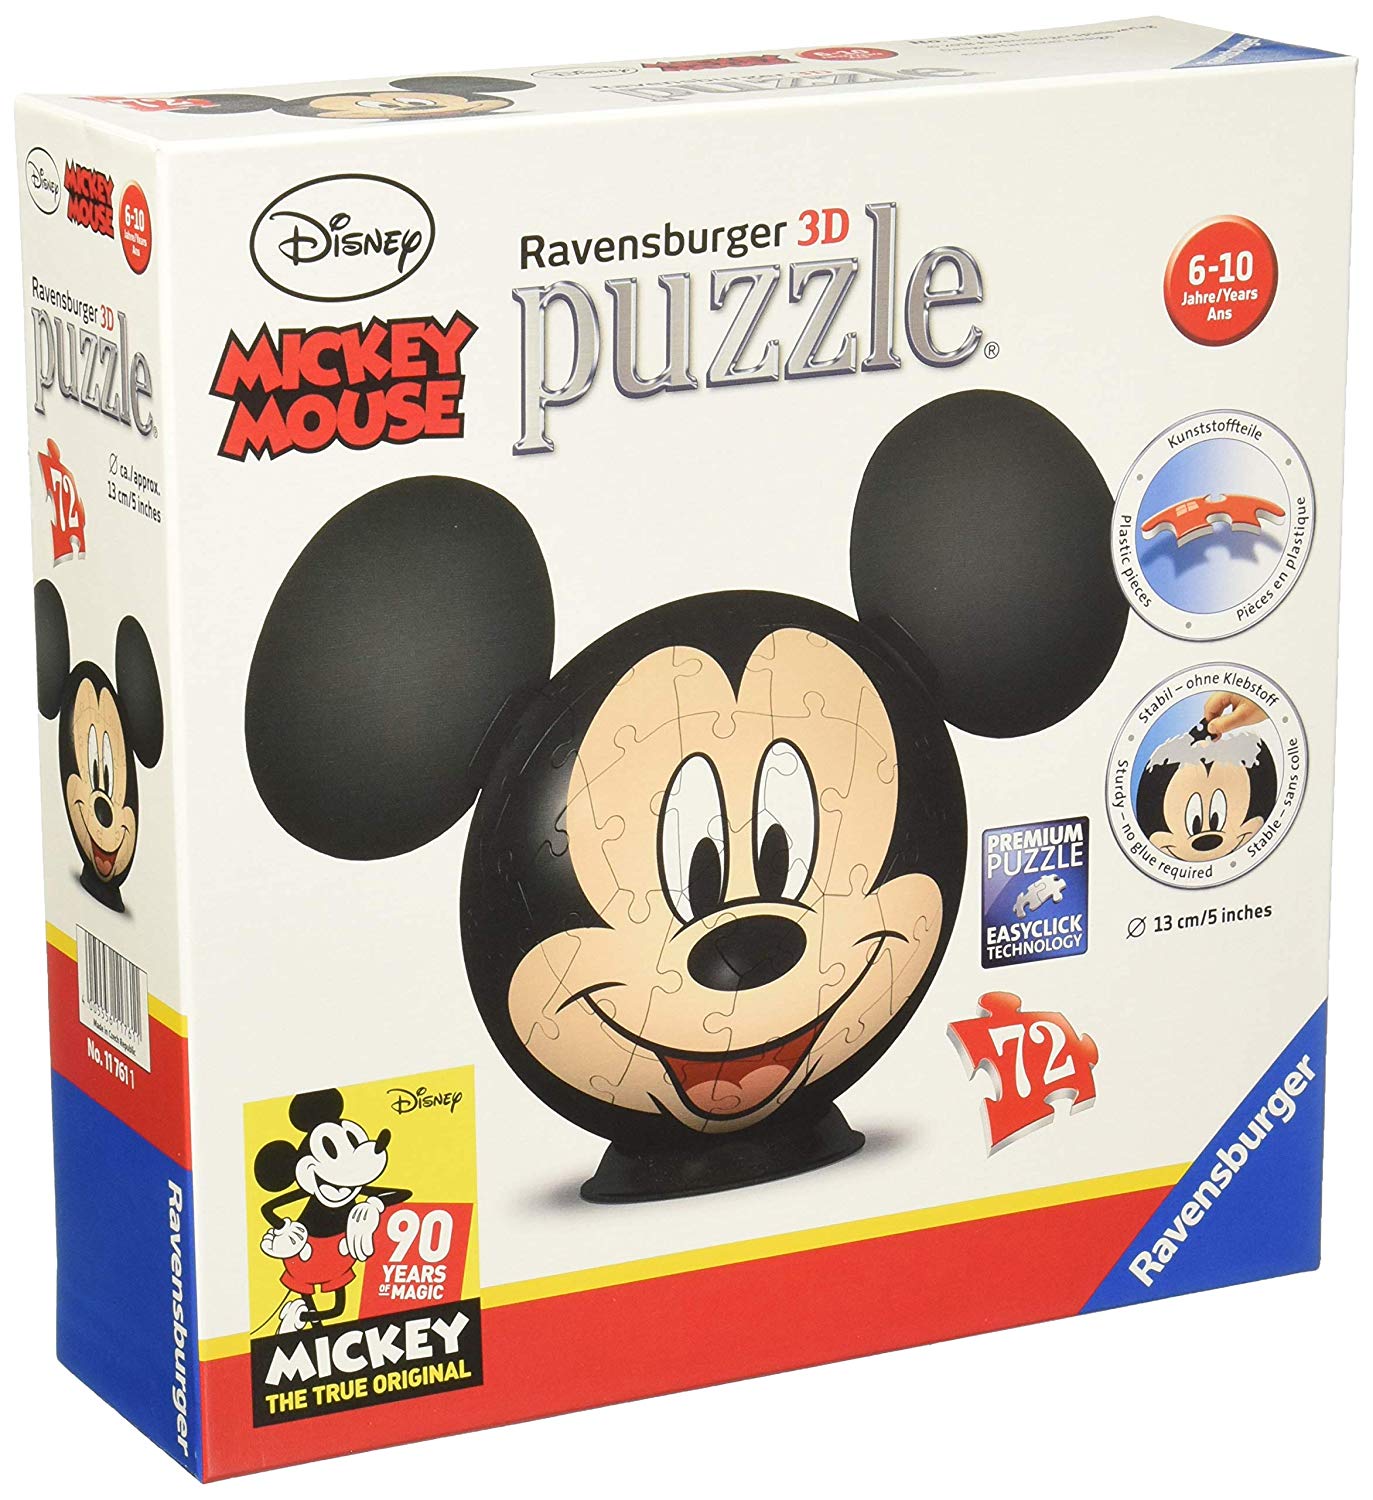 Ravensburger 11761 Mickey Mouse 3D Puzzle